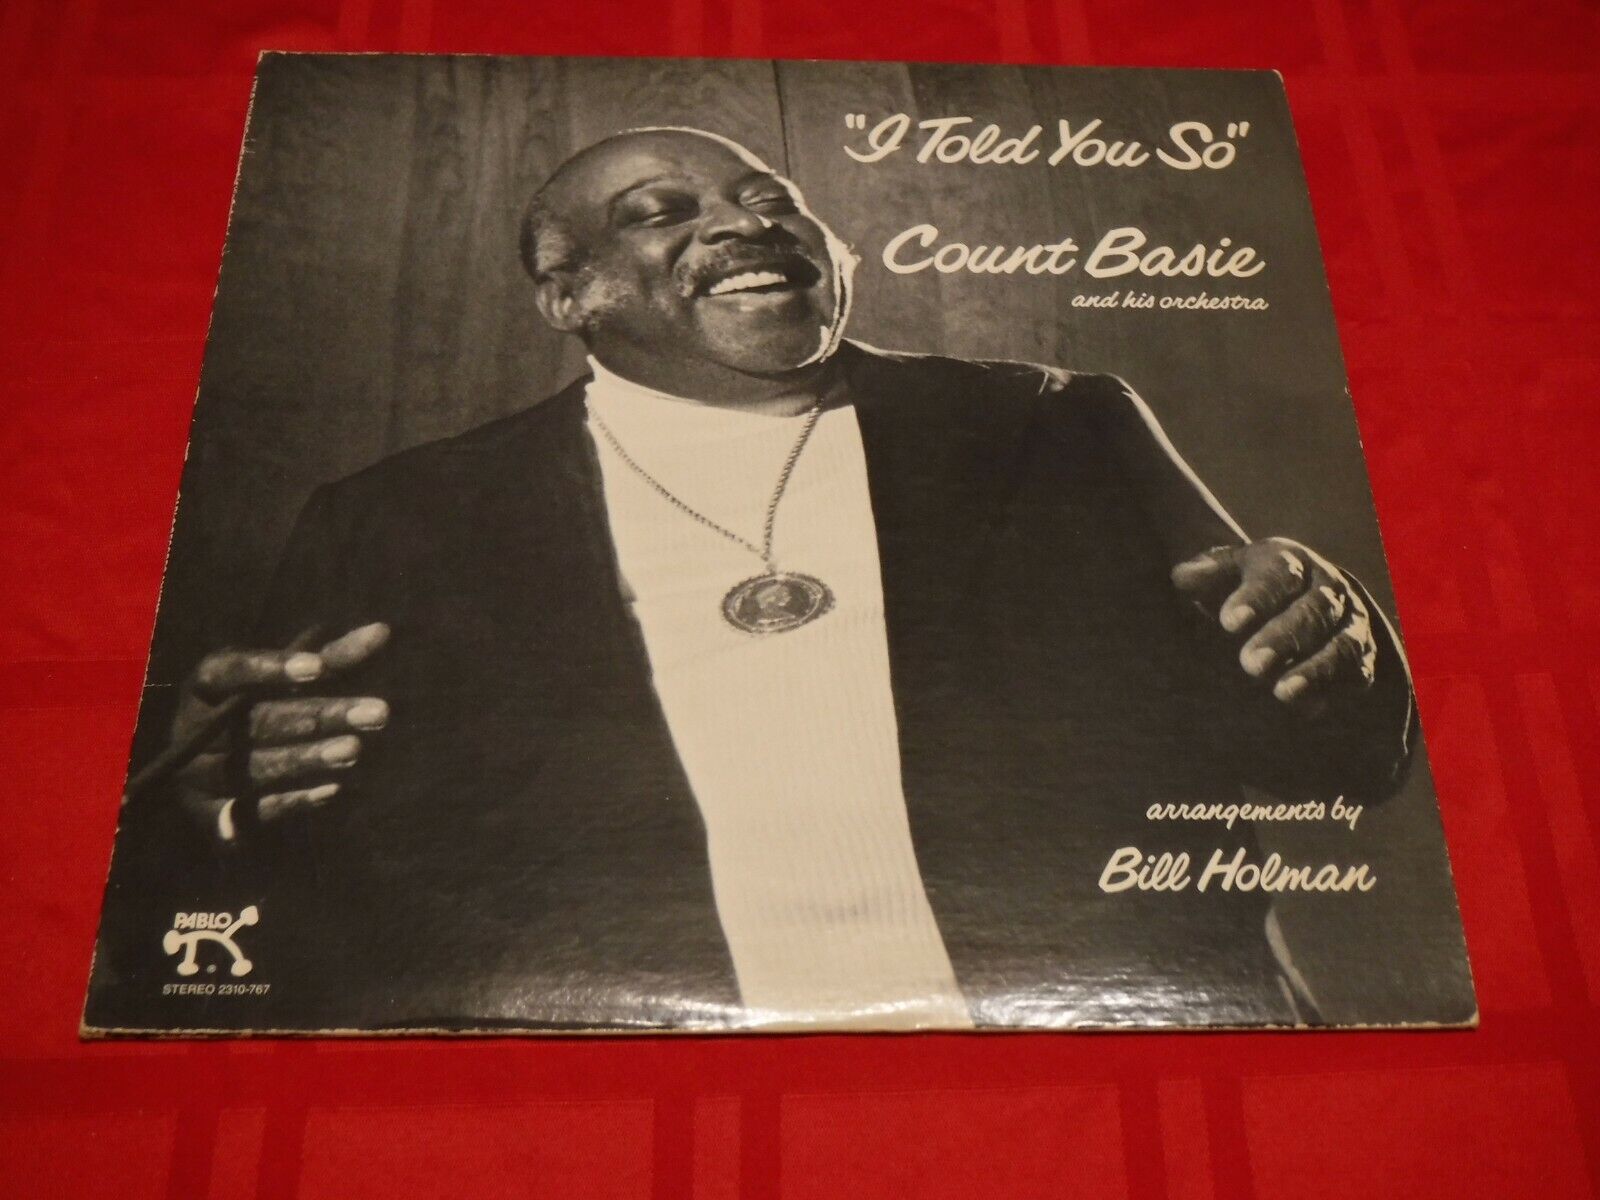 Count Basie I Told You So 1977 LP Pablo 23 10 767 Something To Live Too Close 